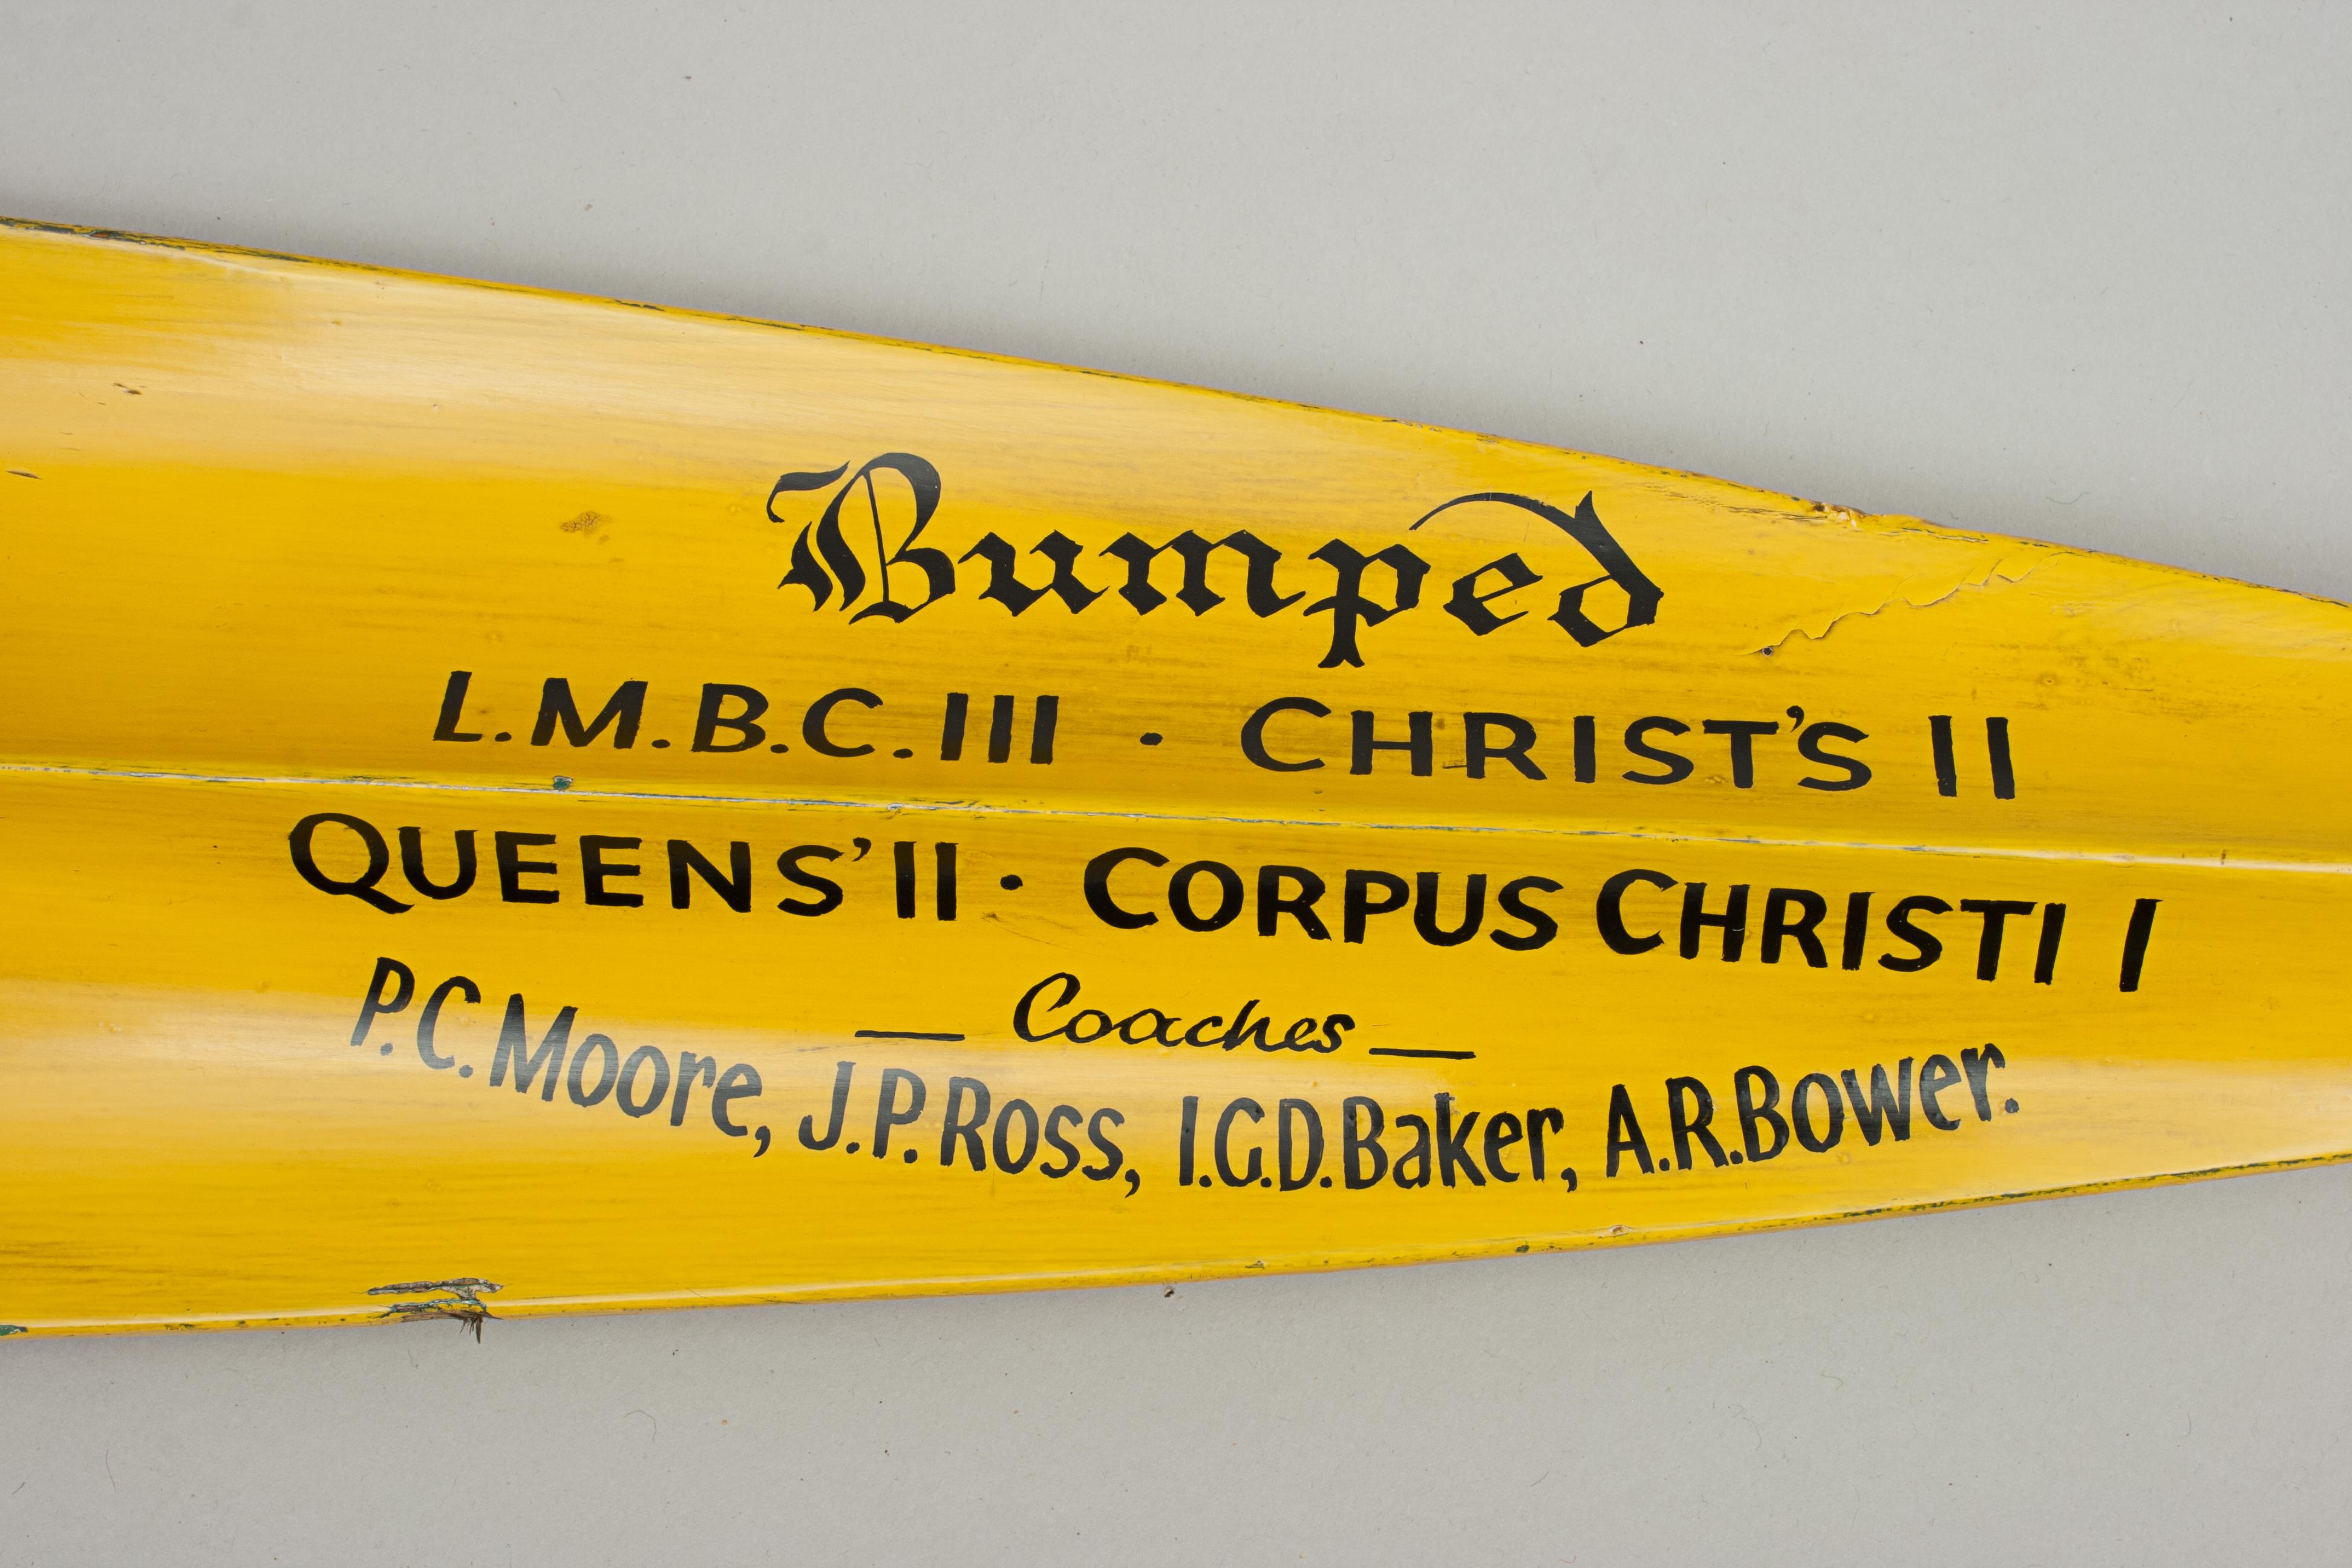 Cambridge presentation oar, trophy blade, 1961.
The oar is an original traditional Clare College (Cambridge University) presentation rowing oar tip with calligraphy and college insignia. The paint and writing on the trophy blade is in good